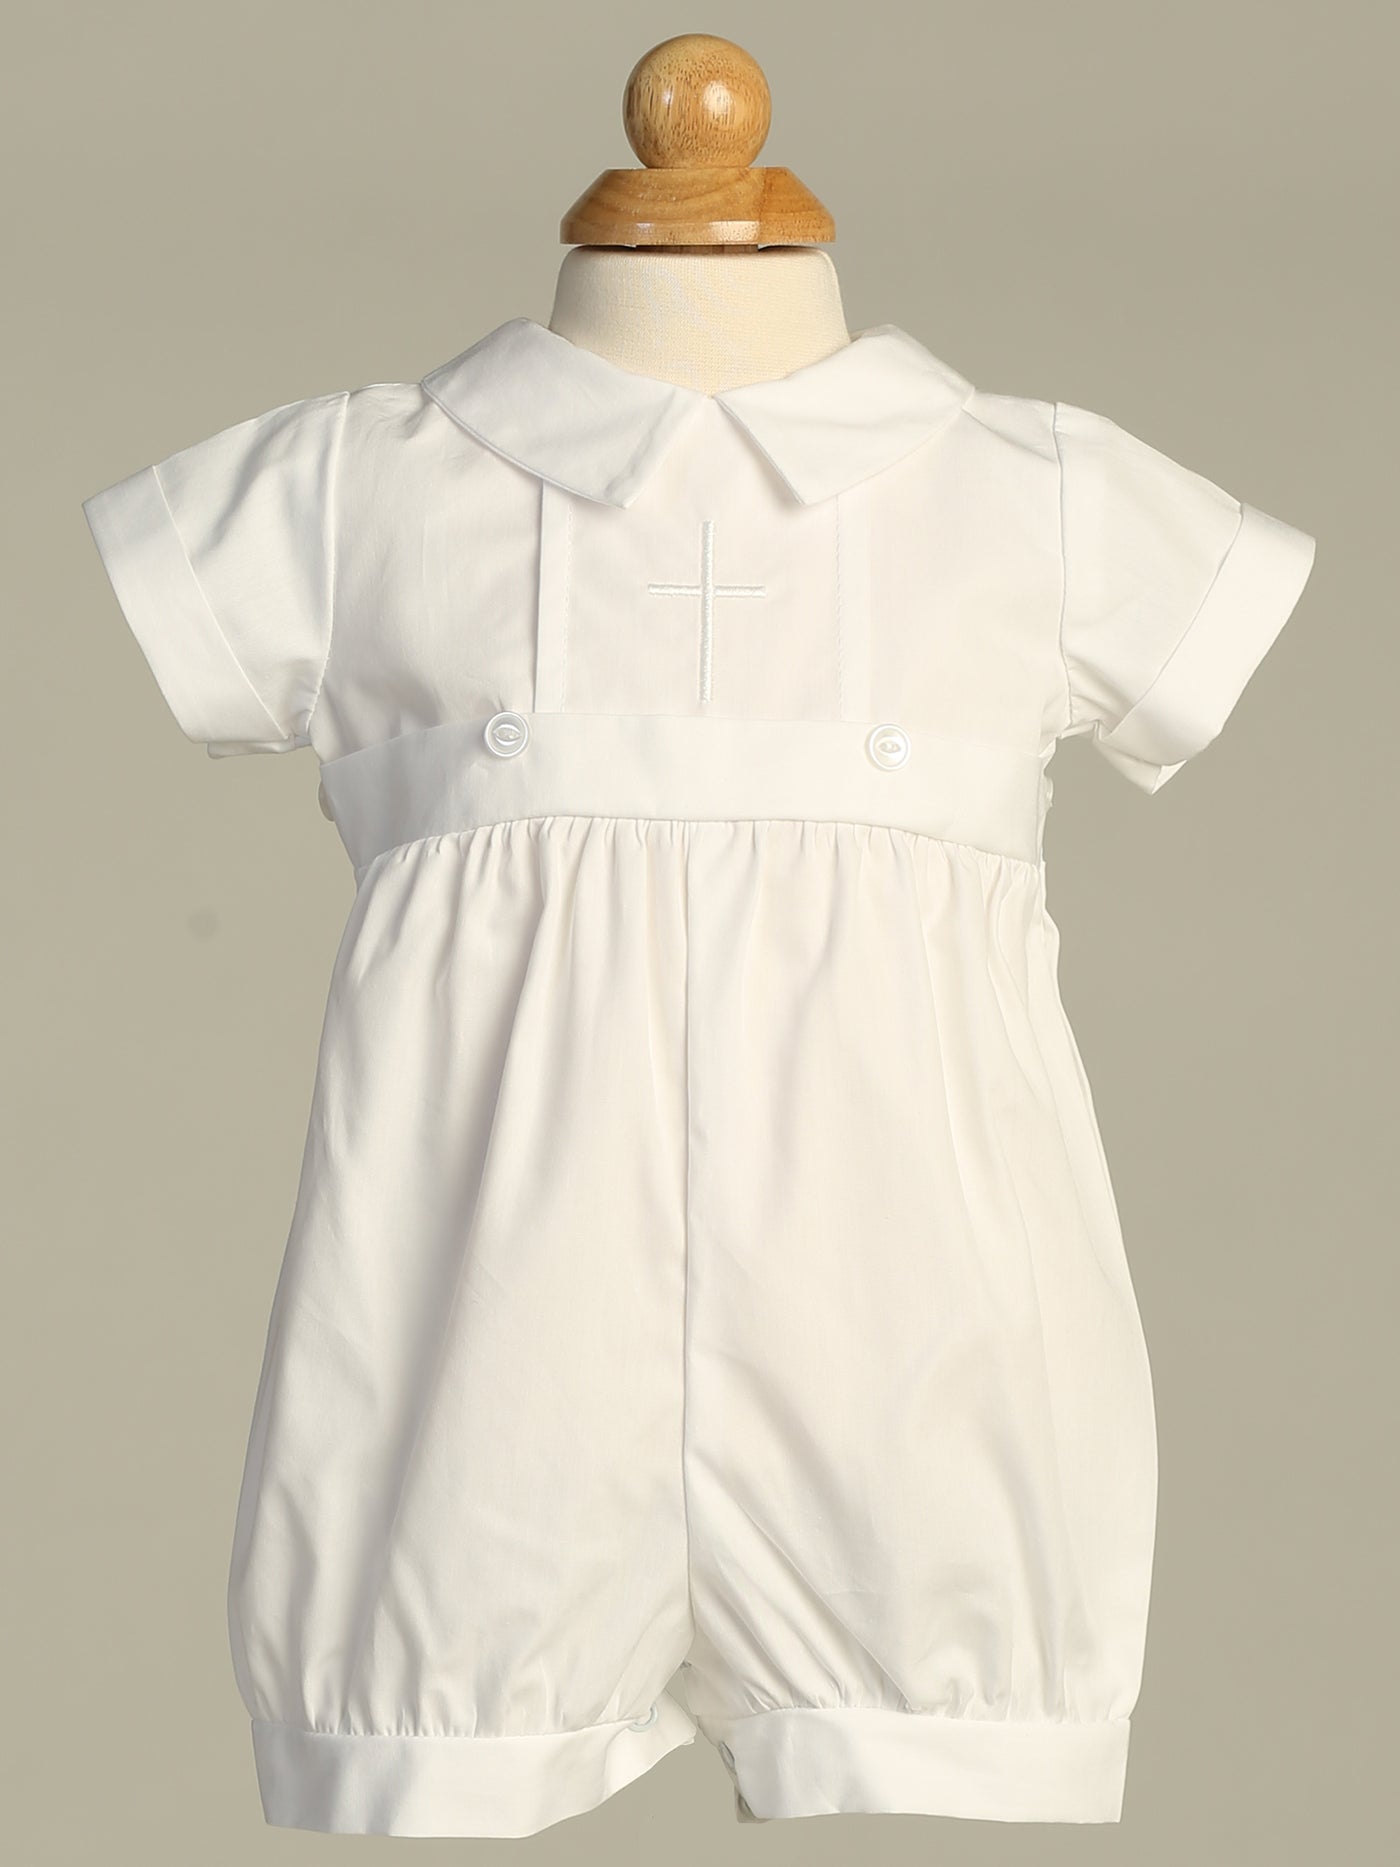 Boy's White Christening Robe with Detachable Gown - Dominic